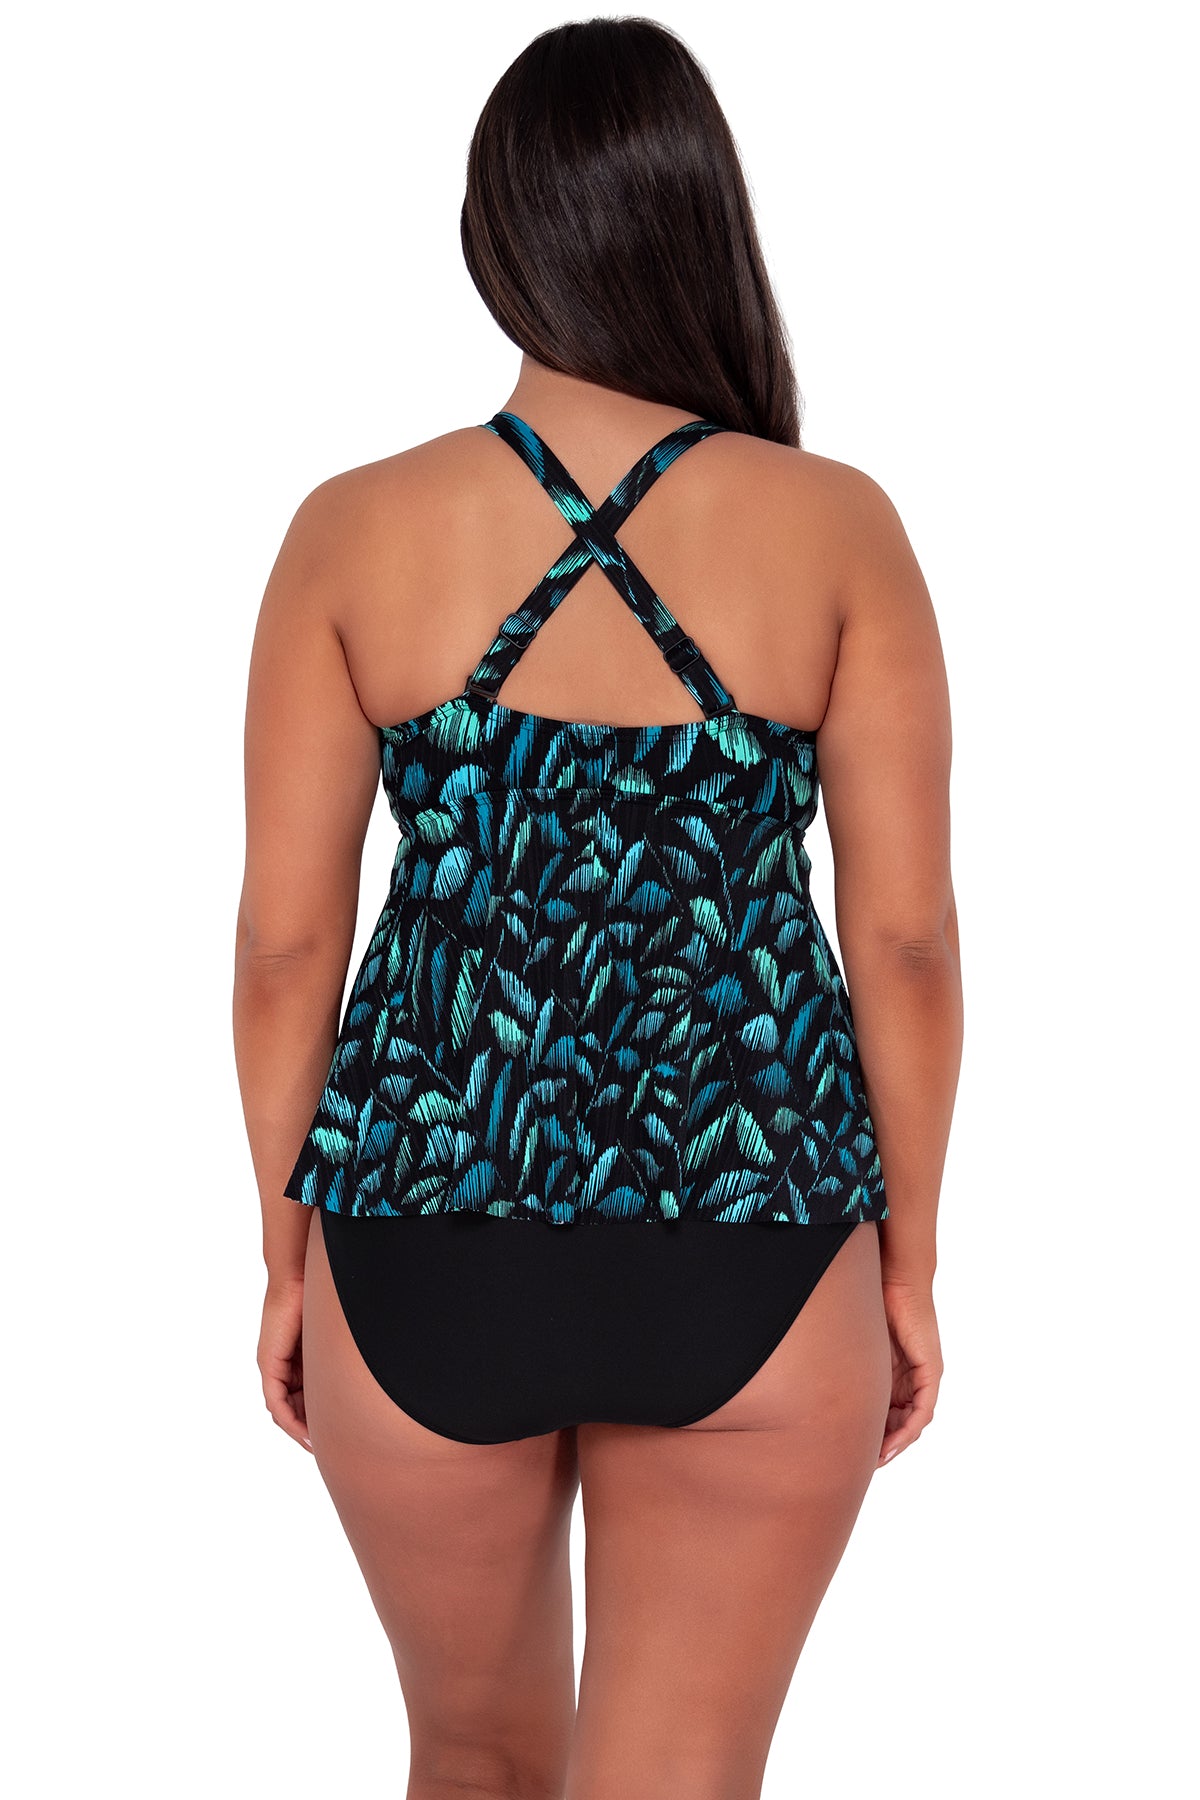 Back pose #1 of Nicki wearing Sunsets Escape Cascade Seagrass Texture Marin Tankini Top showing crossback straps